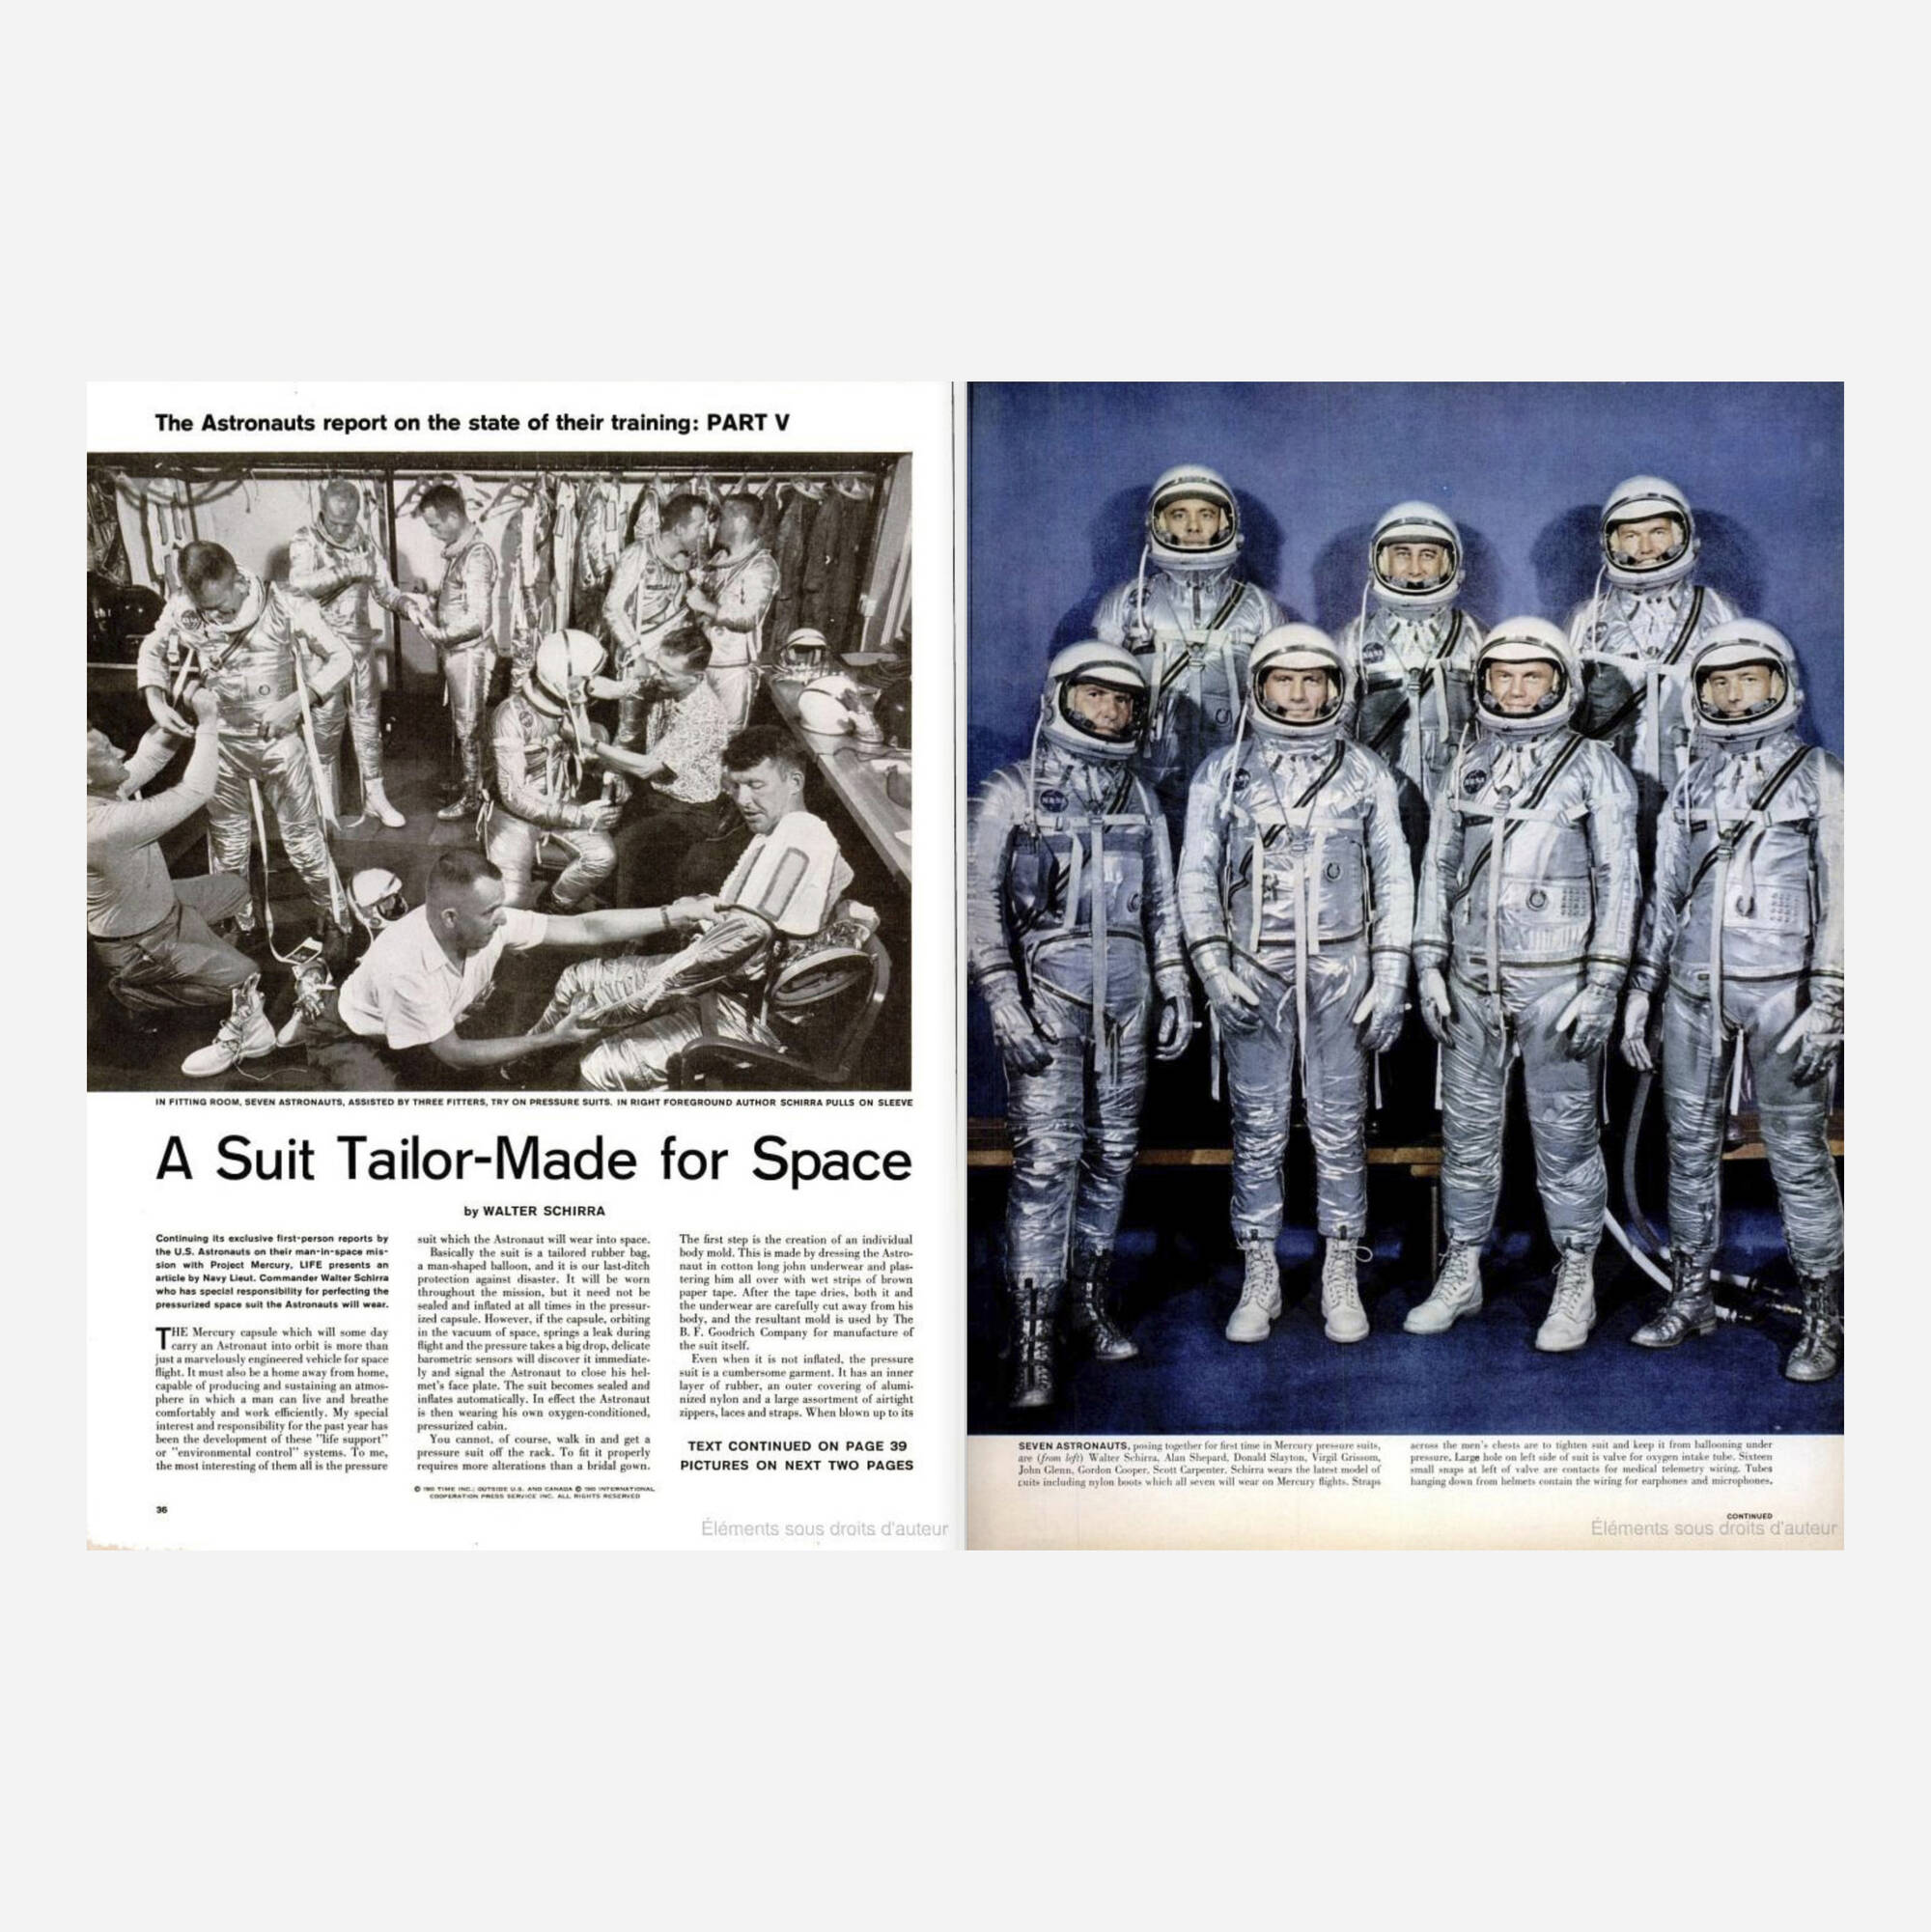 100: The first Original Seven Mercury astronauts wearing their first pressure spacesuits, Ralph Morse [Project Mercury], July 1960 < One Giant Leap for Mankind: Vintage Photographs from the Victor Martin-Malburet Collection, 28